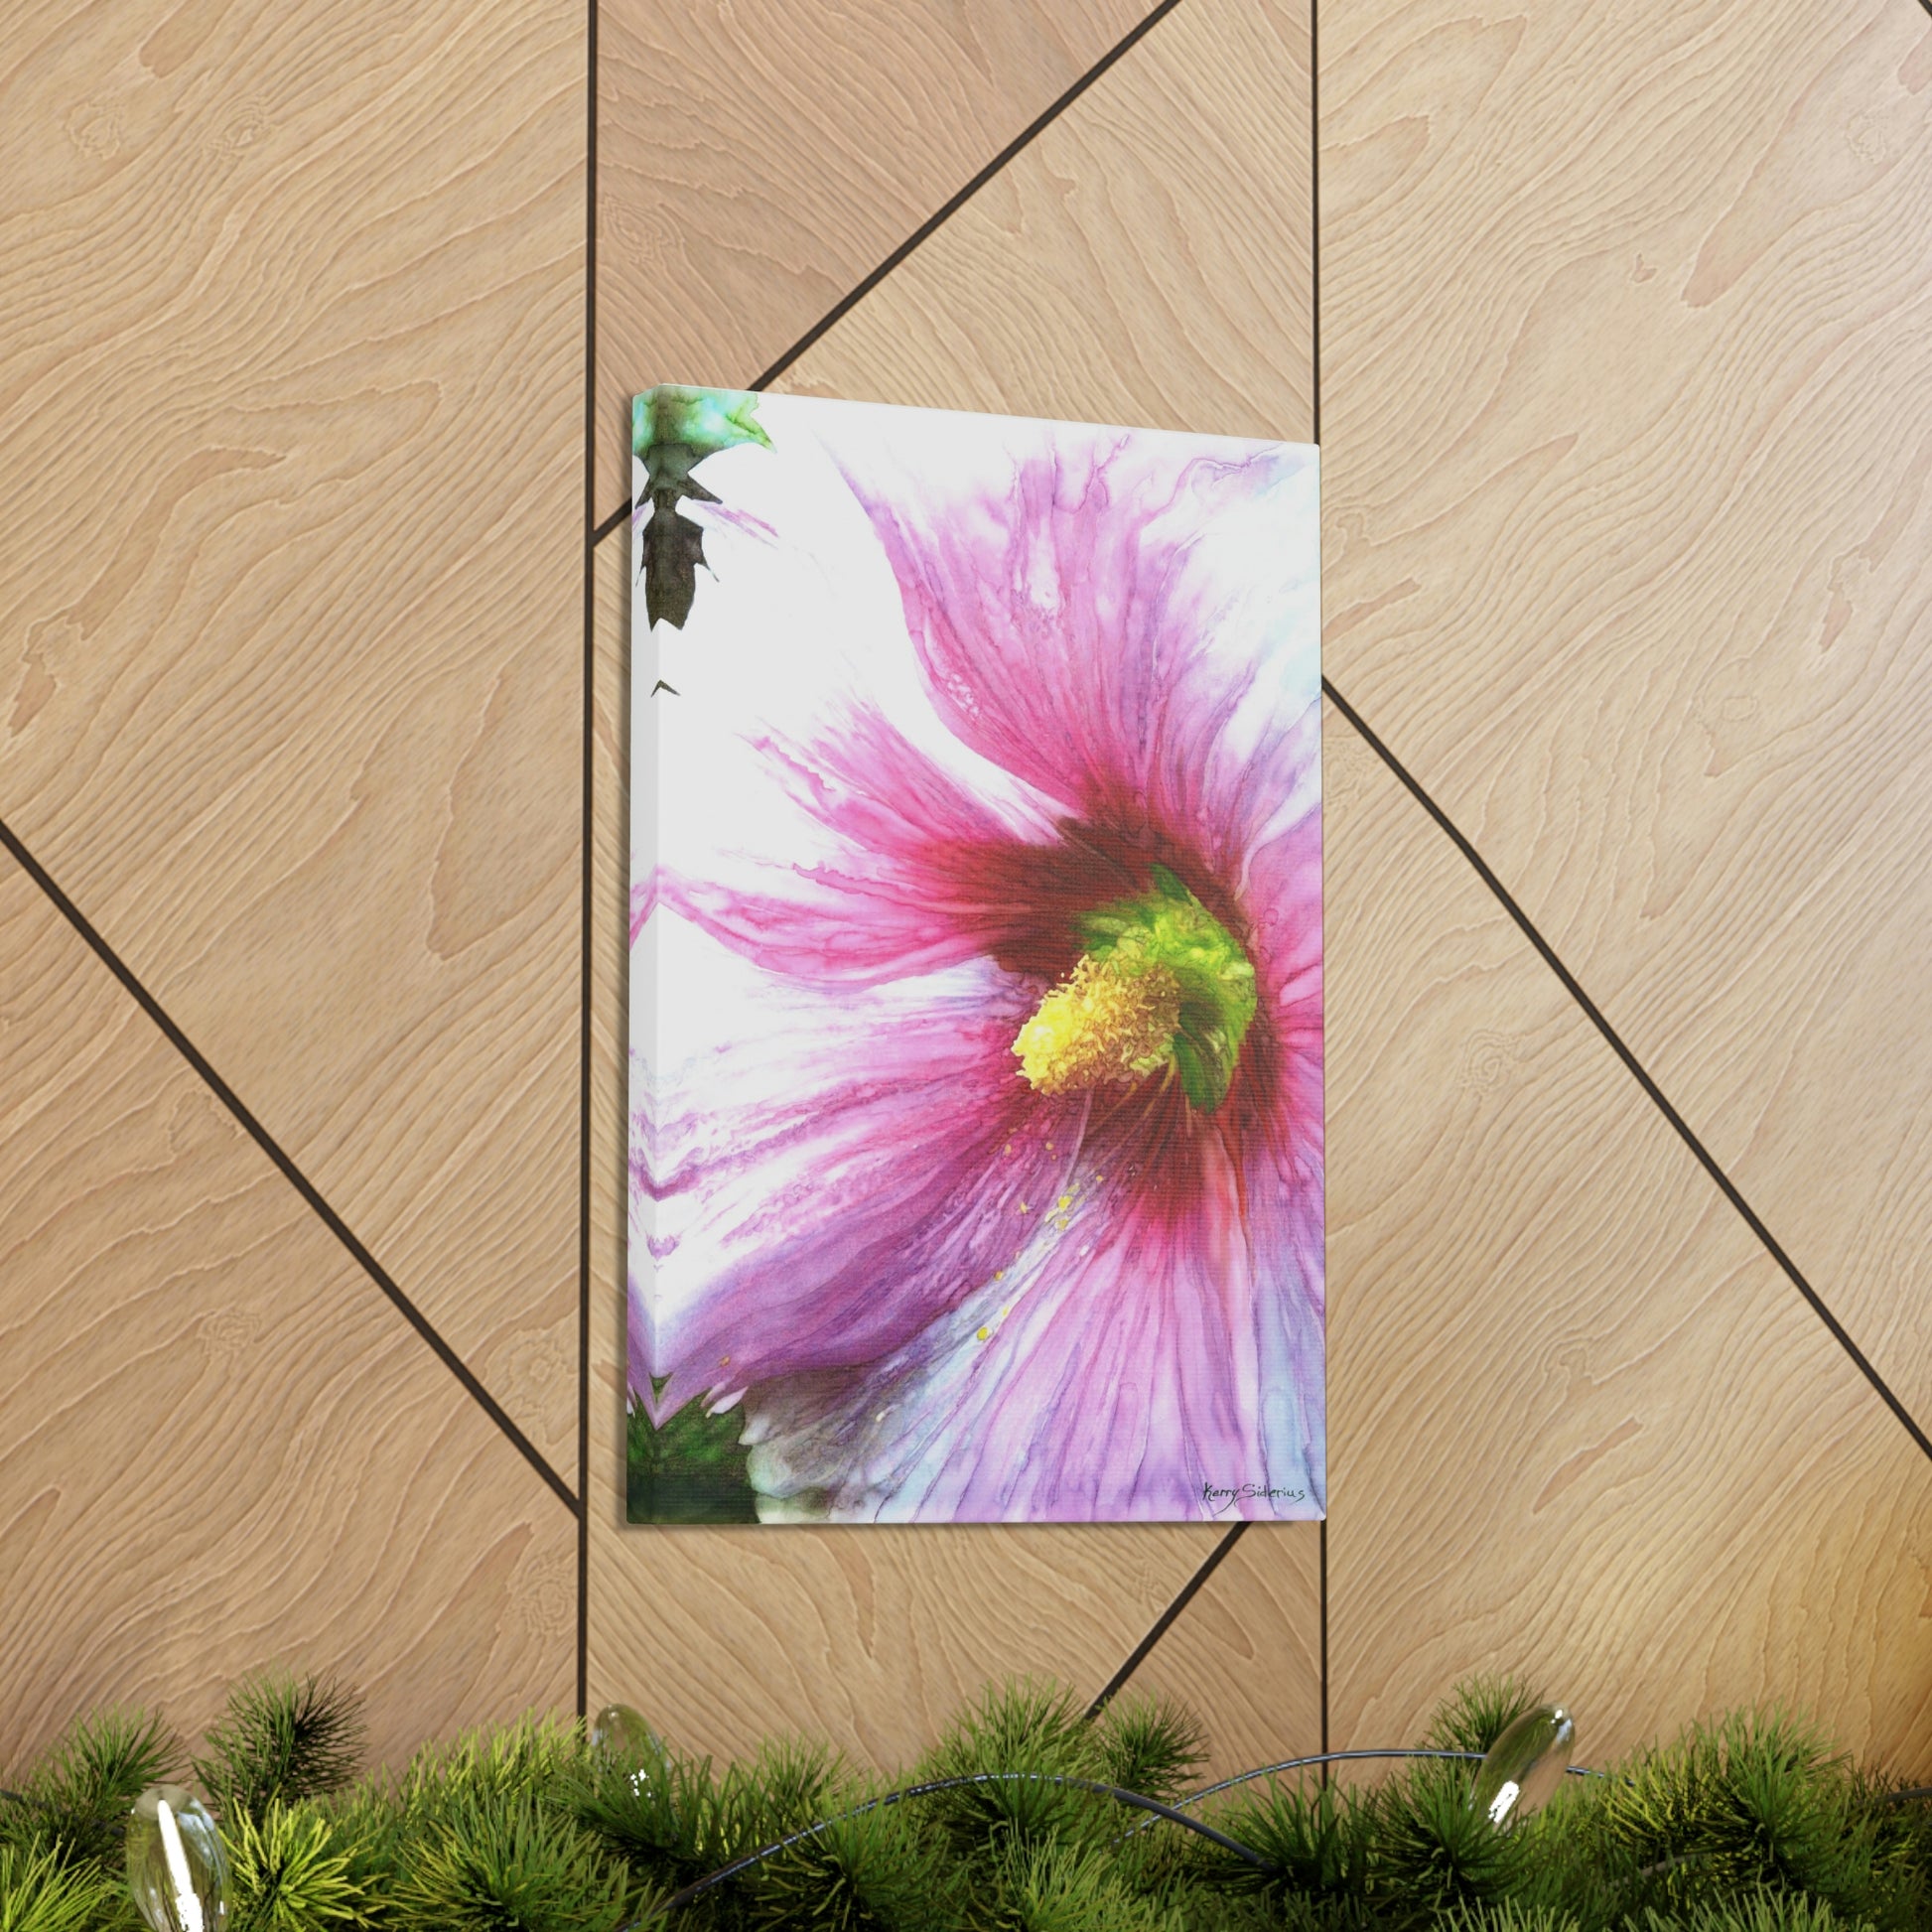 "Pollen on a Hollyhock" Gallery Wrapped Canvas - Kerry Siderius Art 